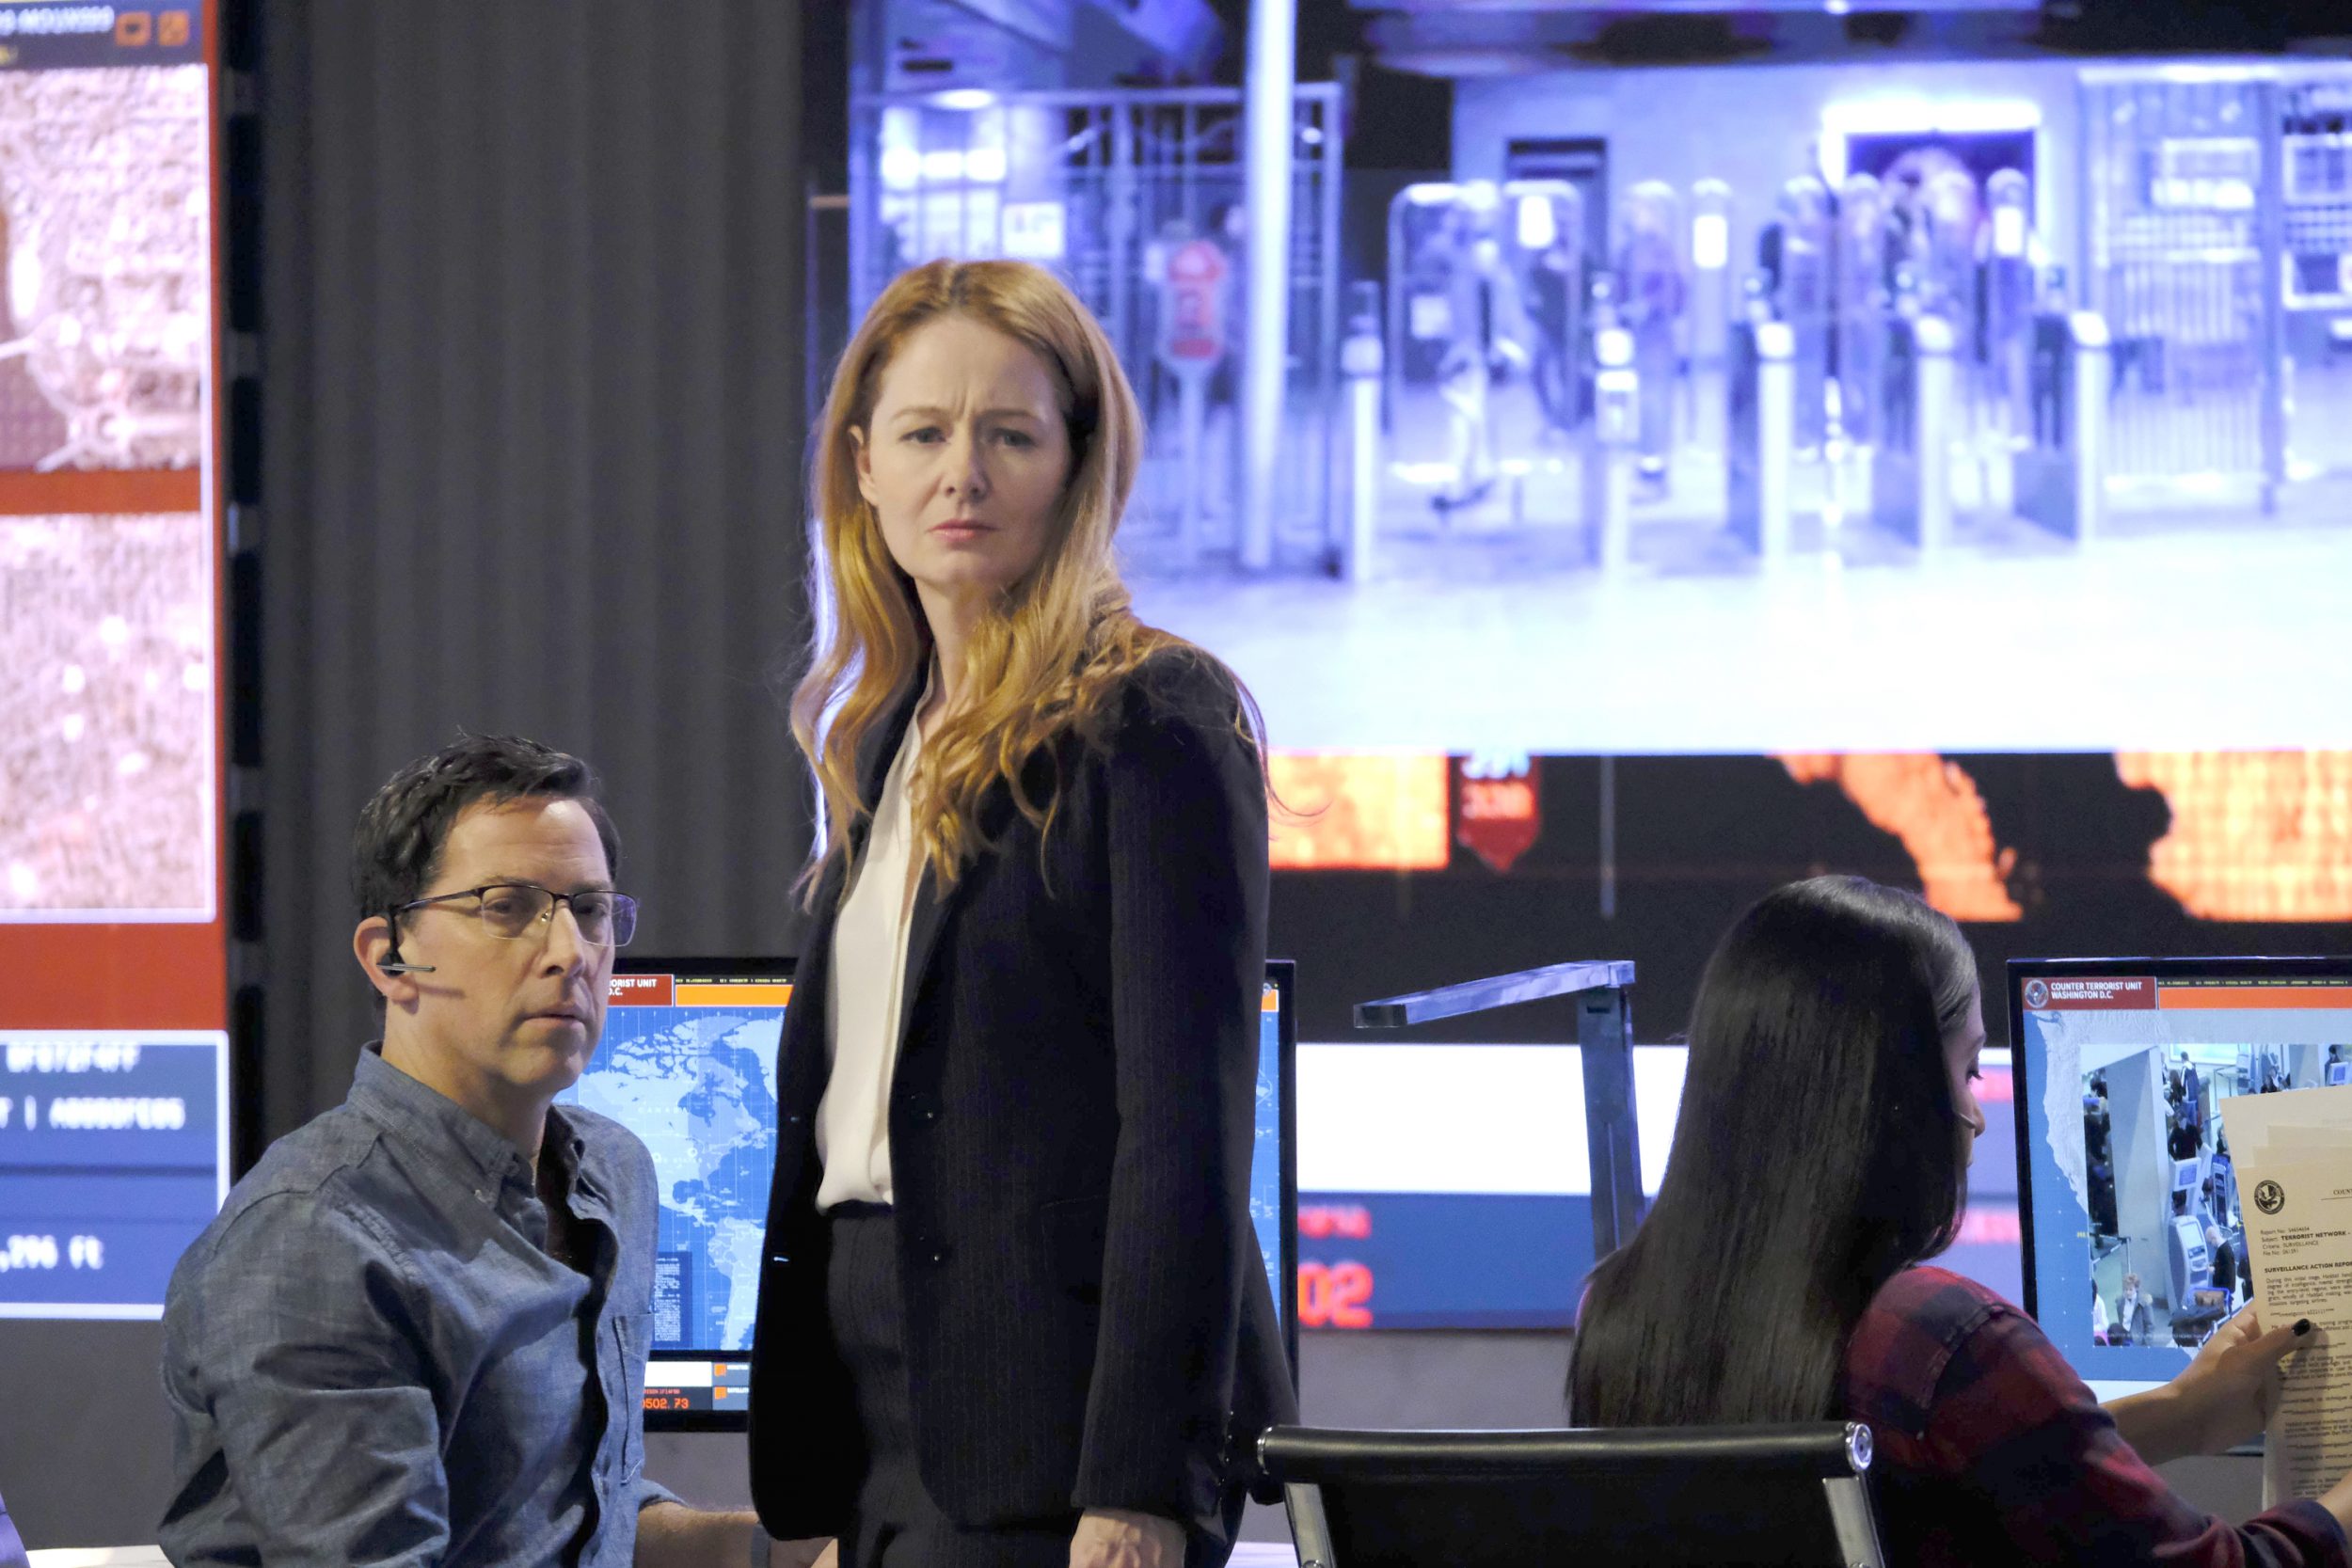 24: LEGACY: L-R: Dan Bucatinsky and Miranda Otto in the “3:00 PM-4:00 PM” episode of 24: LEGACY airing Monday, Feb. 20 (8:00-9:01 PM ET/PT) on FOX. ©2017 Fox Broadcasting Co. Cr: Guy D'Alema/FOX